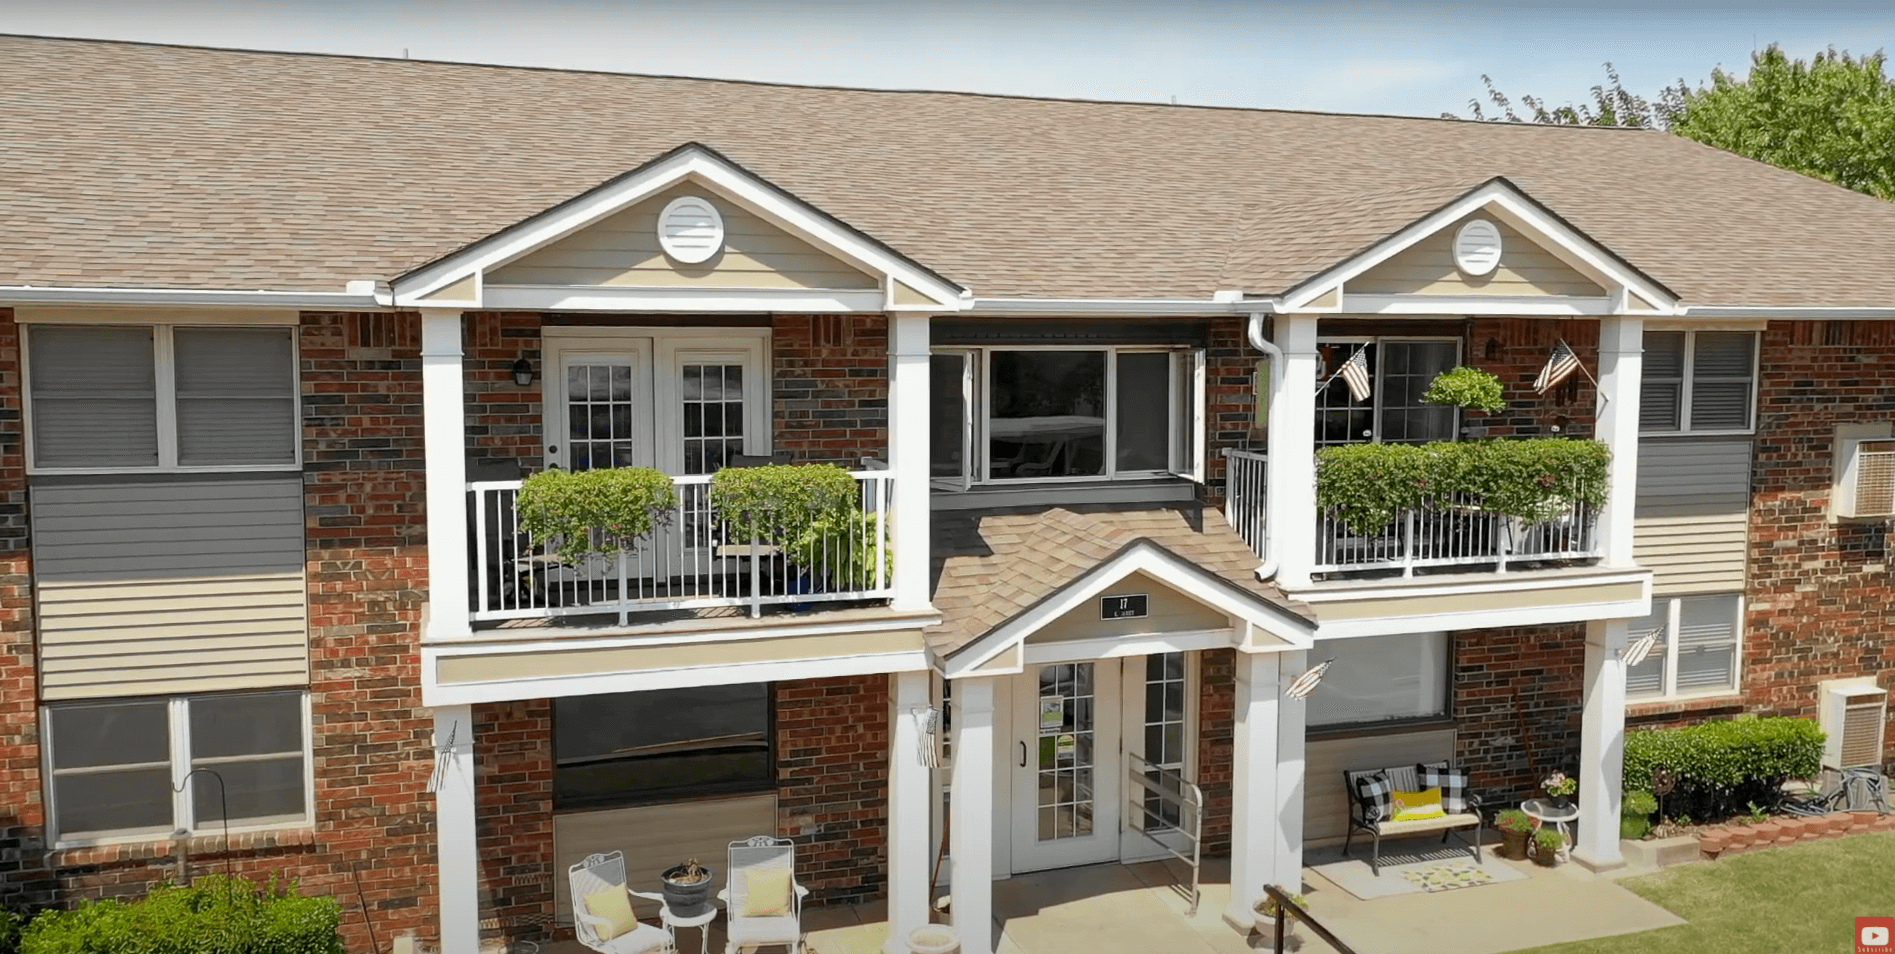 Spanish Cove Independent Living apartments